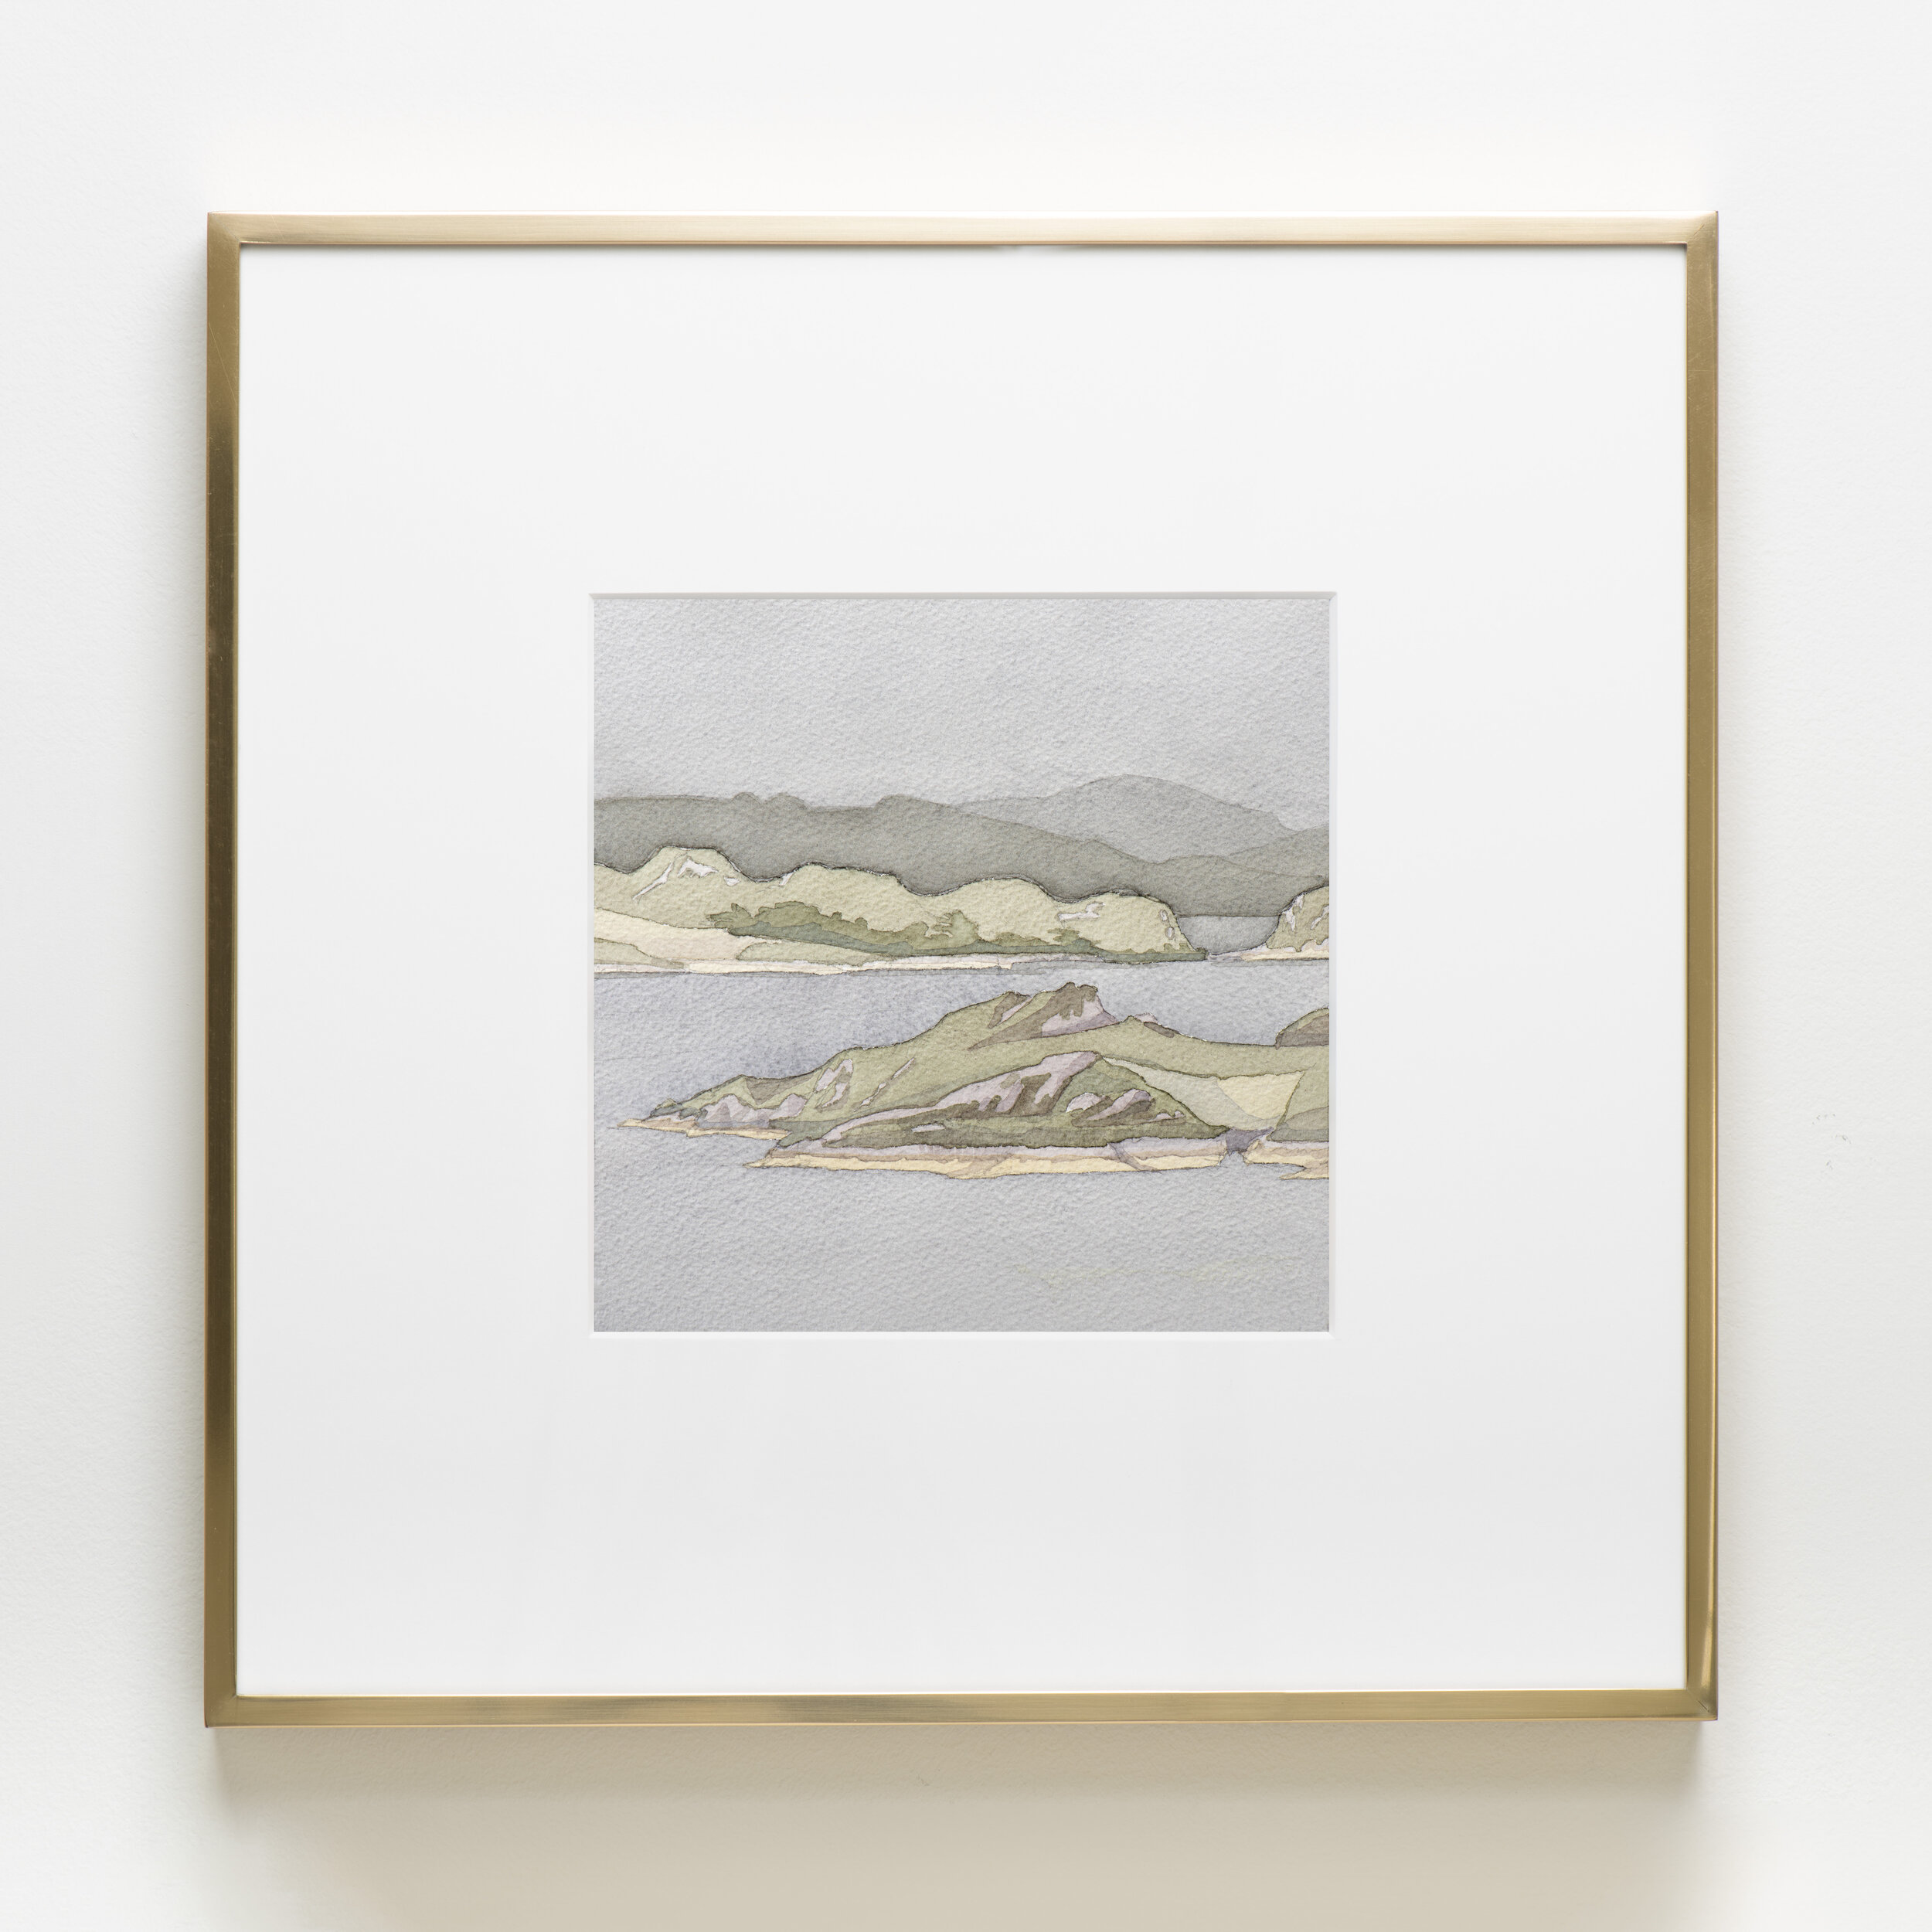   Loch Toridon , 2019 Watercolor on paper 16 1/4 x 16 1/4 x 1 1/4 inches (framed) 